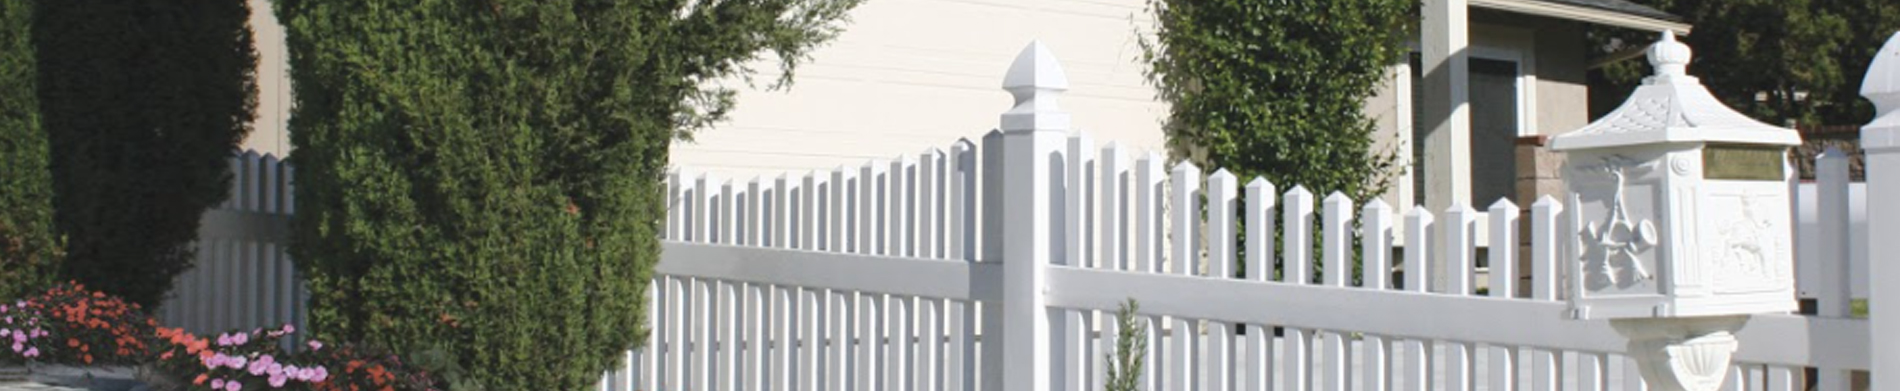 USA-made vinyl fencing from Duramax Fences – Reliability and Durability